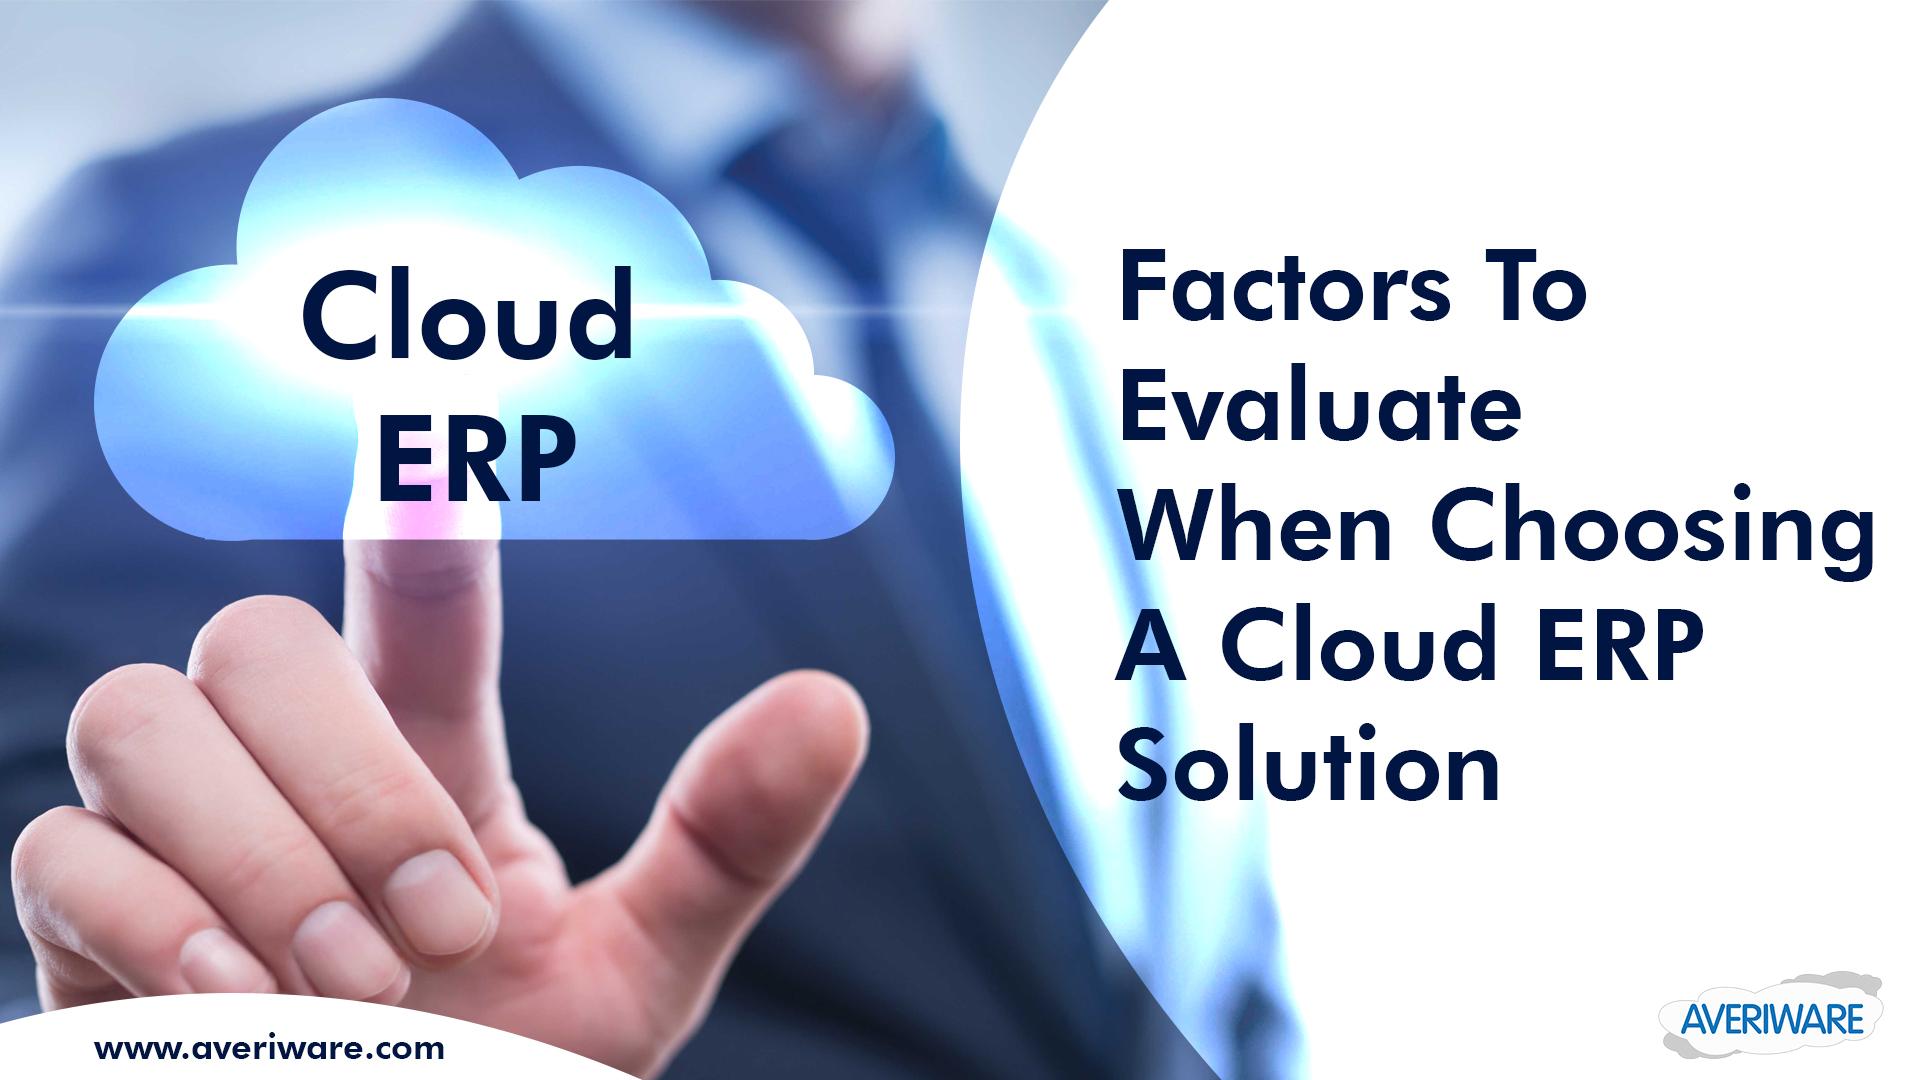 Factors to Evaluate When Choosing a Cloud ERP Solution